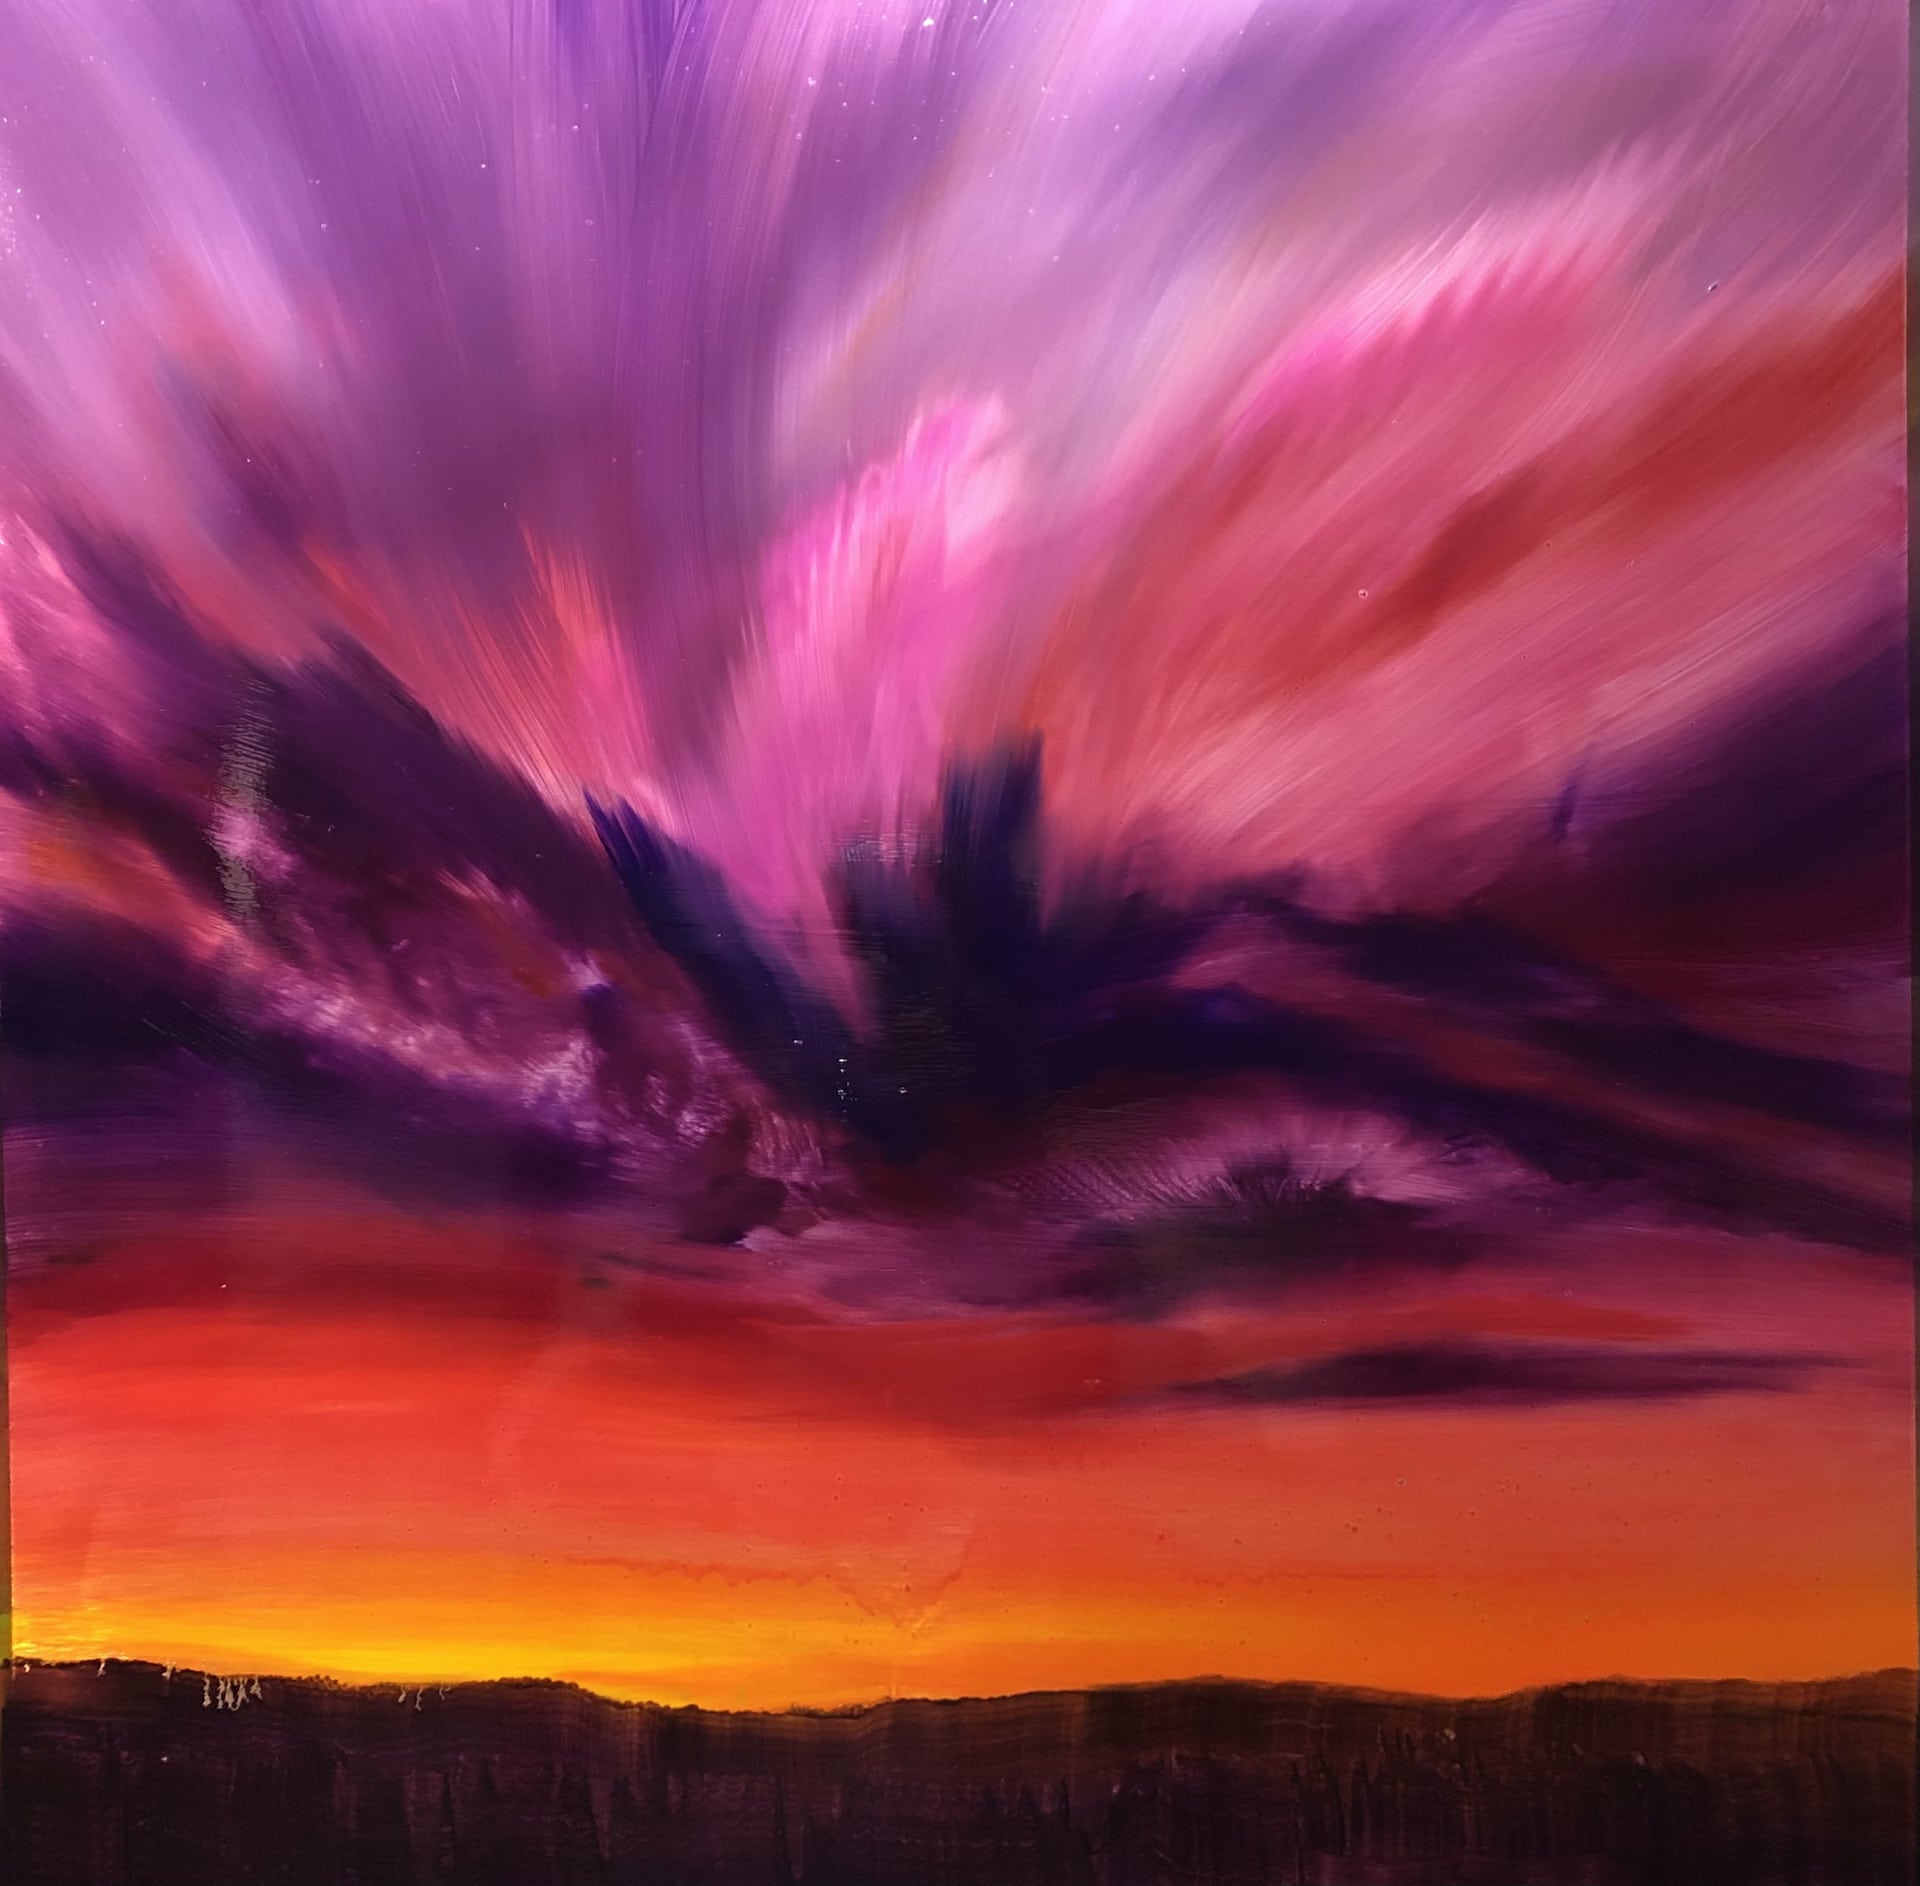 An original cloudscape oil painting on metal panel by artist Cynthia McLoughlin of an orange/purple/pink sunset over a mountainous silhouette..